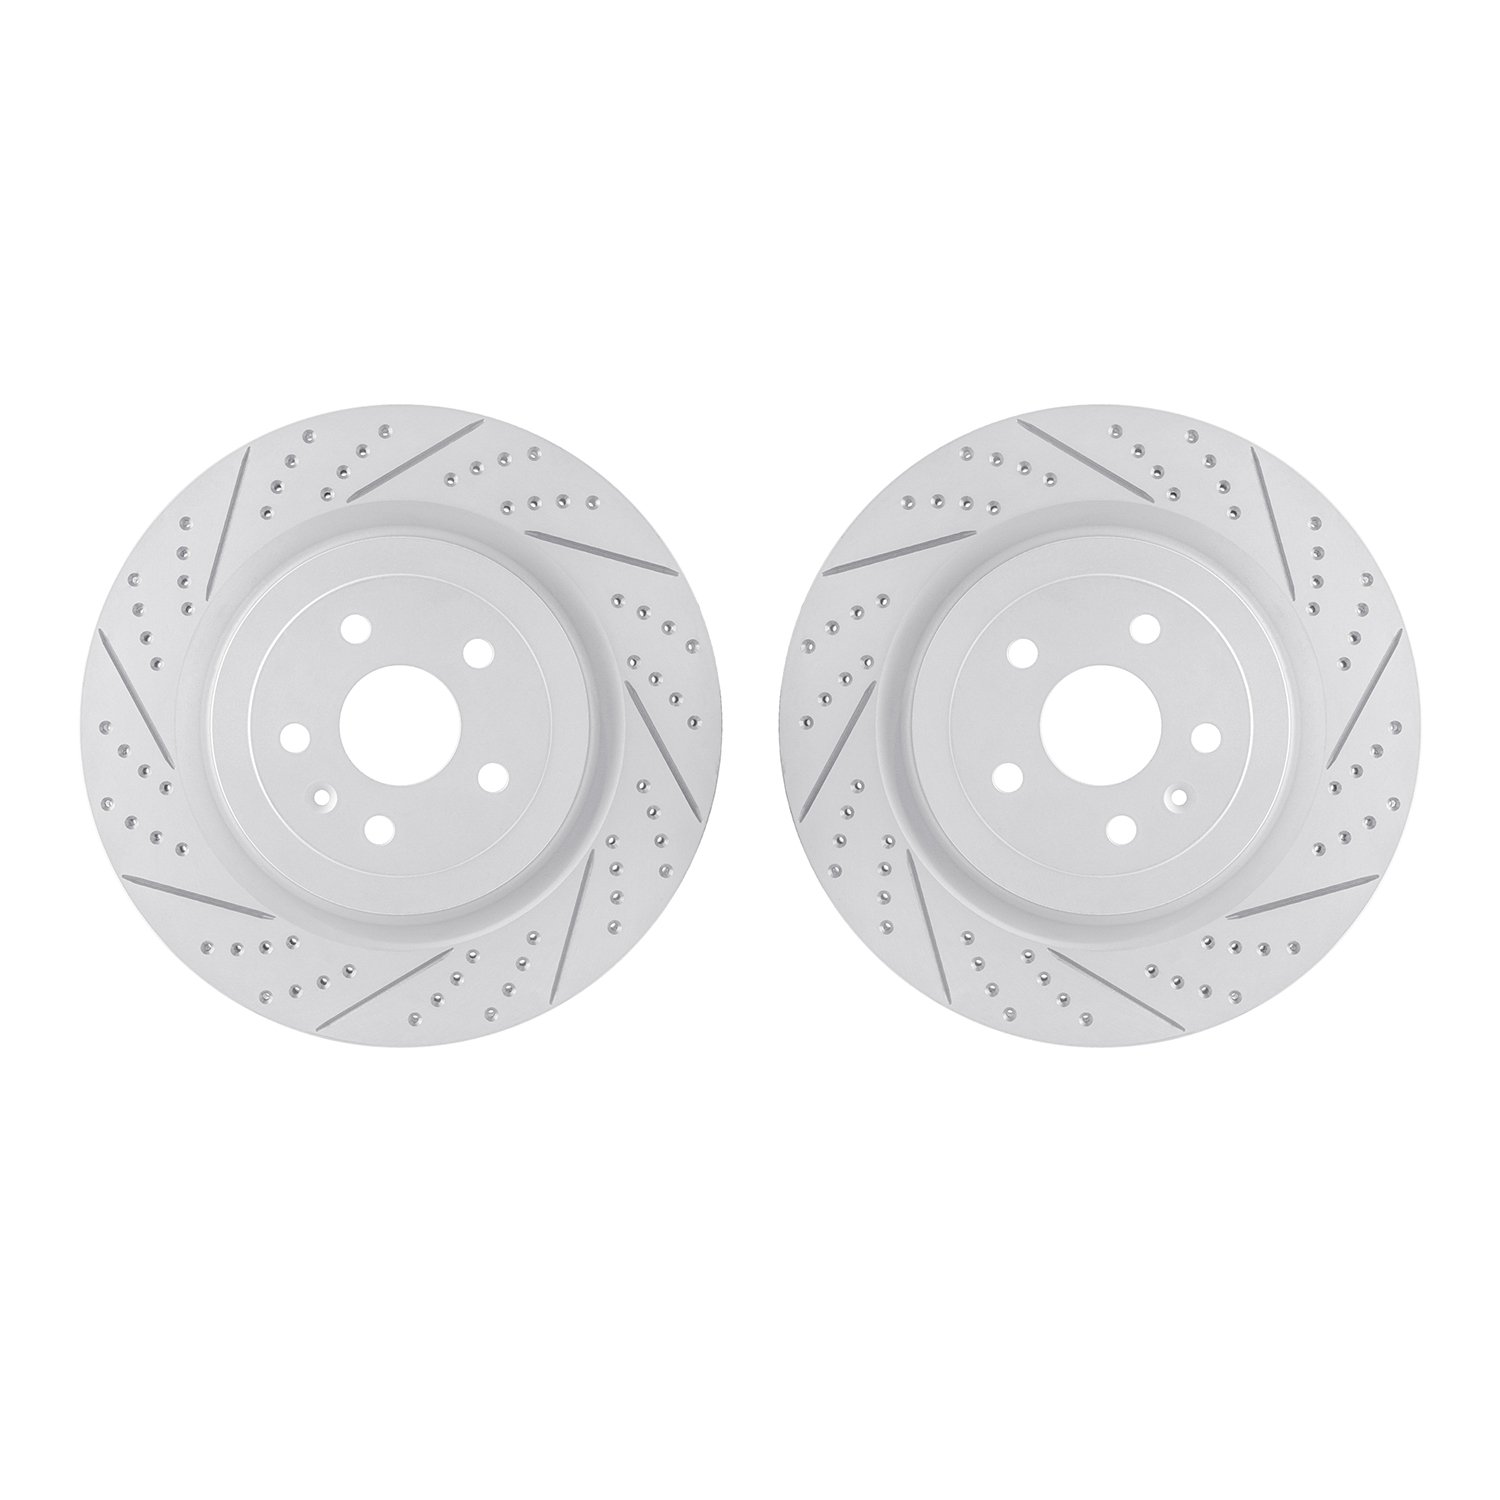 2002-47035 Geoperformance Drilled/Slotted Brake Rotors, Fits Select GM, Position: Rear